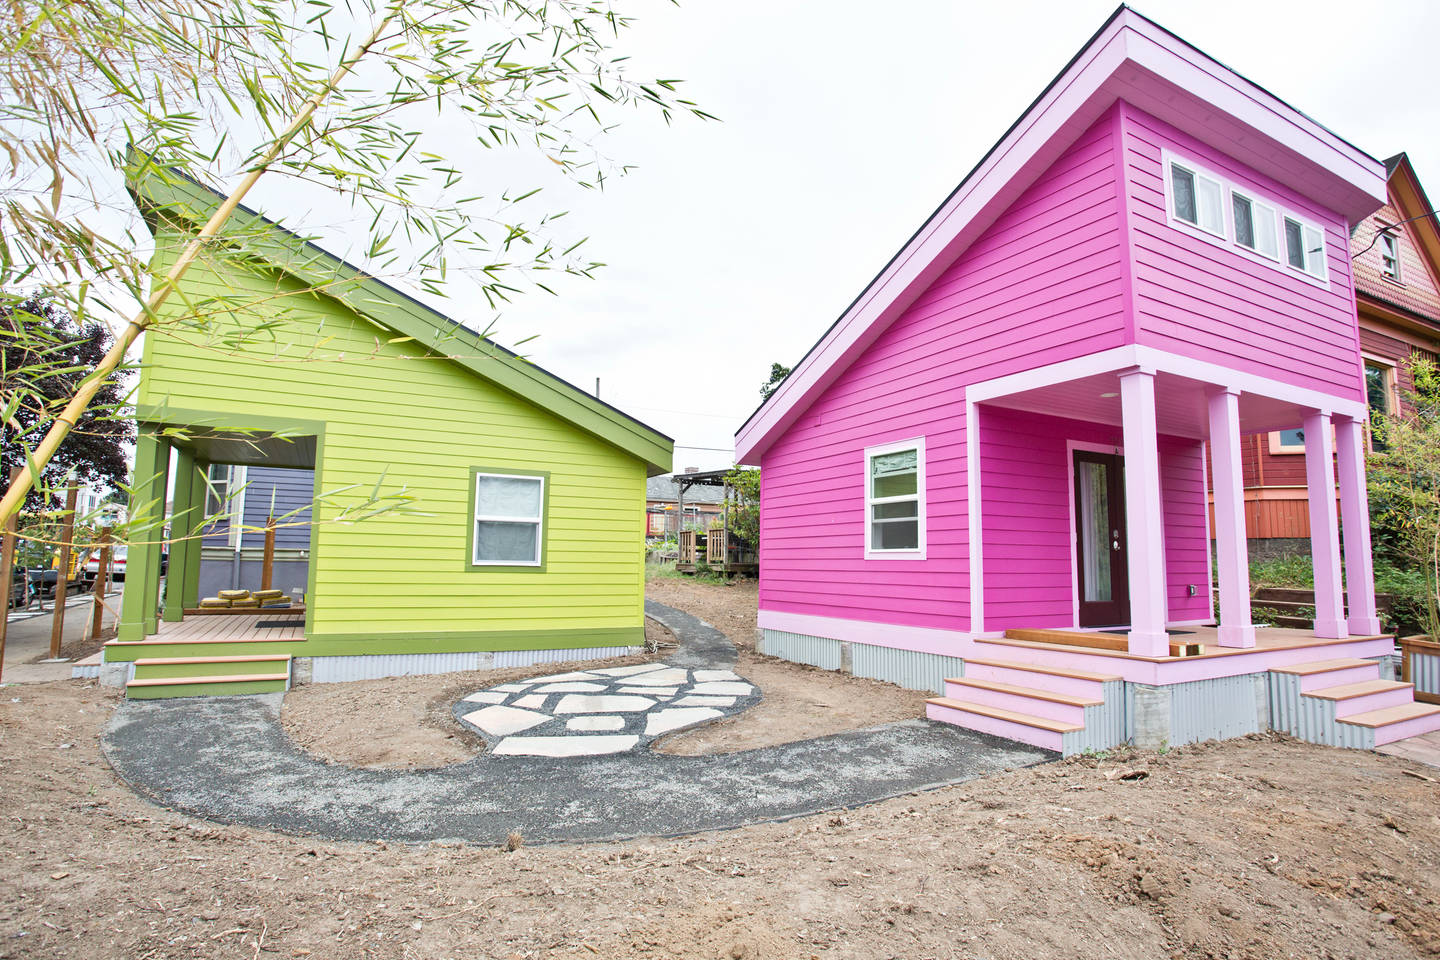 Day-Glo Matching Homes